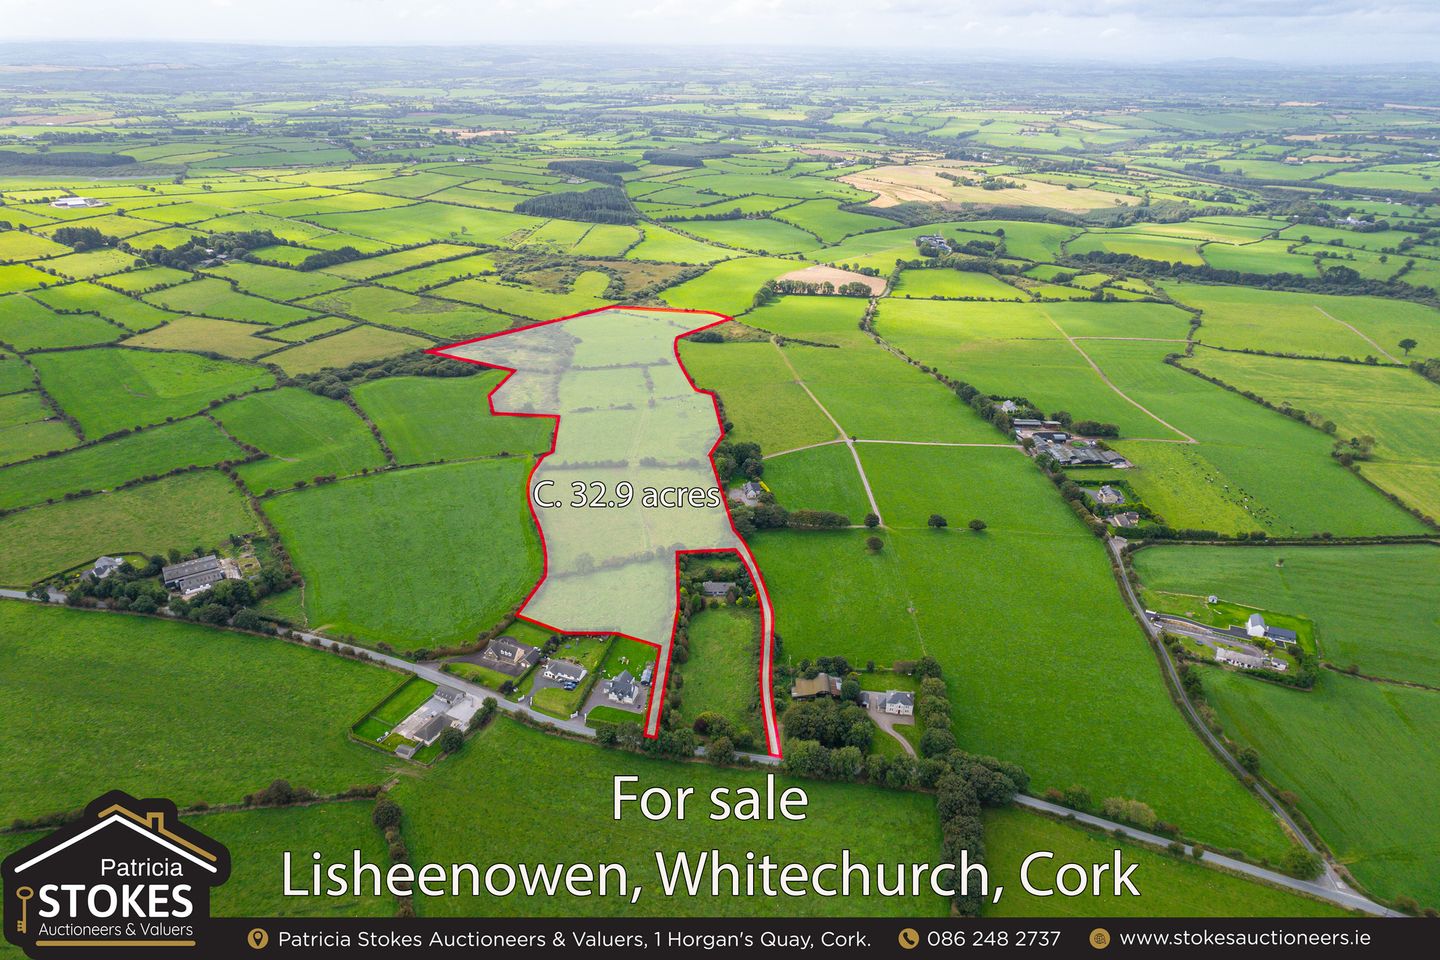 C. 64 acres, Detached home and farm buildings At Lisheenowen and Dromboy North, Whitechurch, Co. Cork